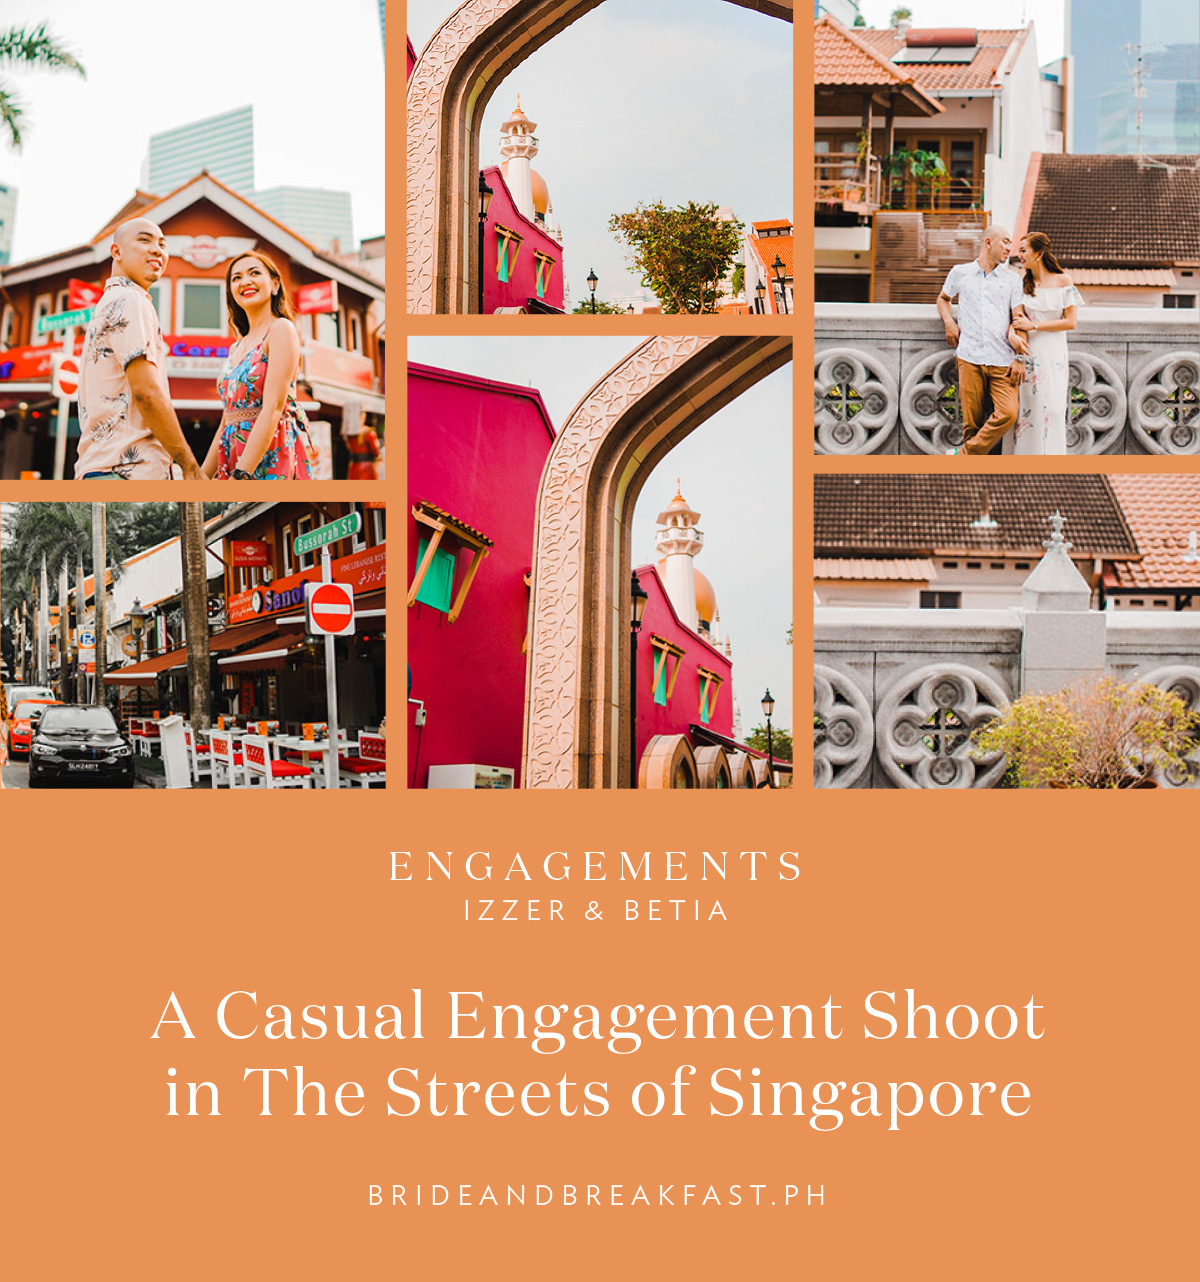 A Casual Engagement Shoot in The Streets of Singapore